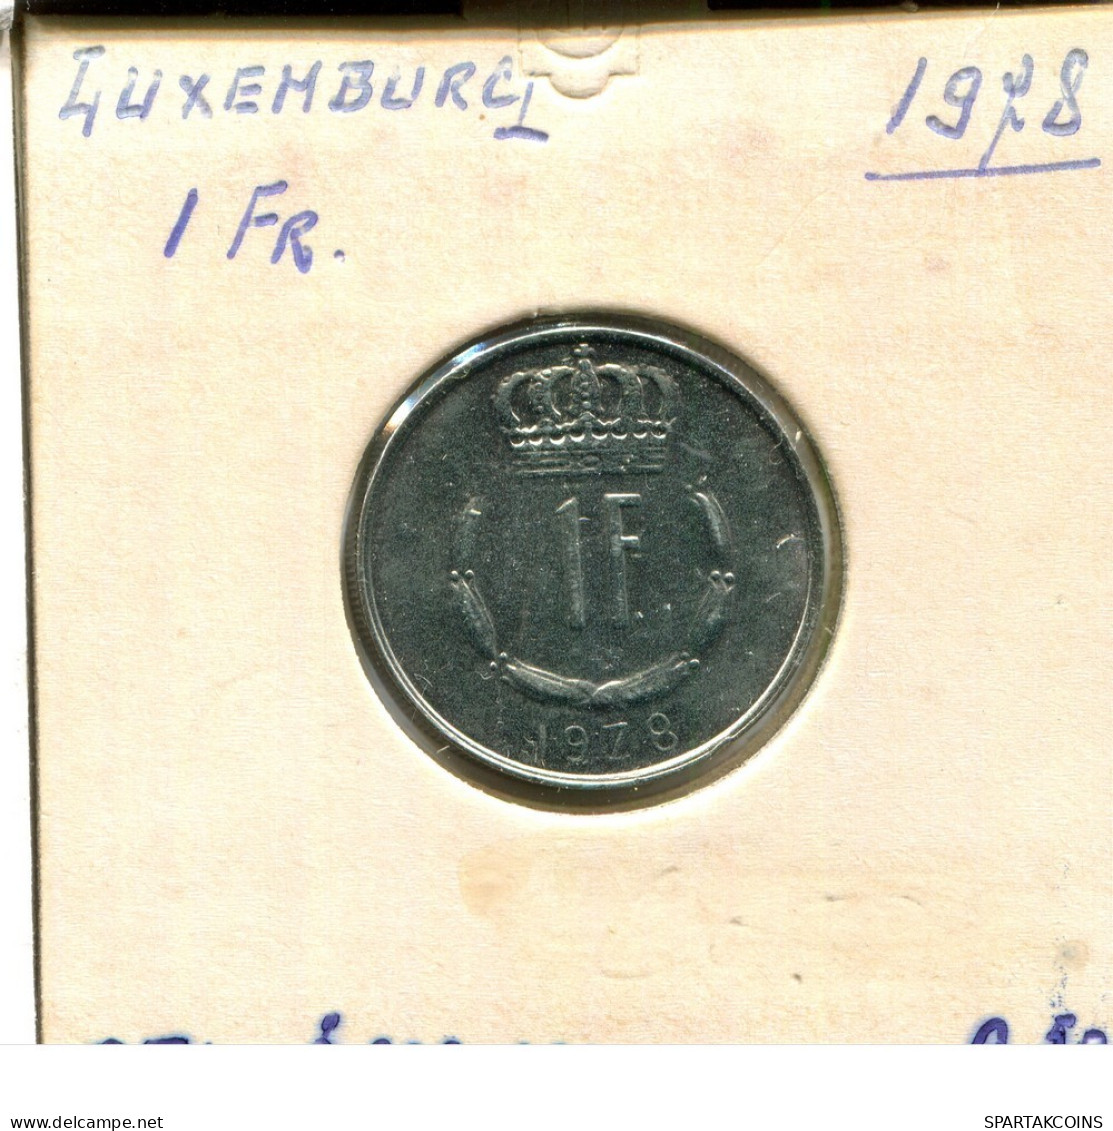 1 FRANC 1978 LUXEMBURG LUXEMBOURG Münze #AT214.D.A - Luxemburg